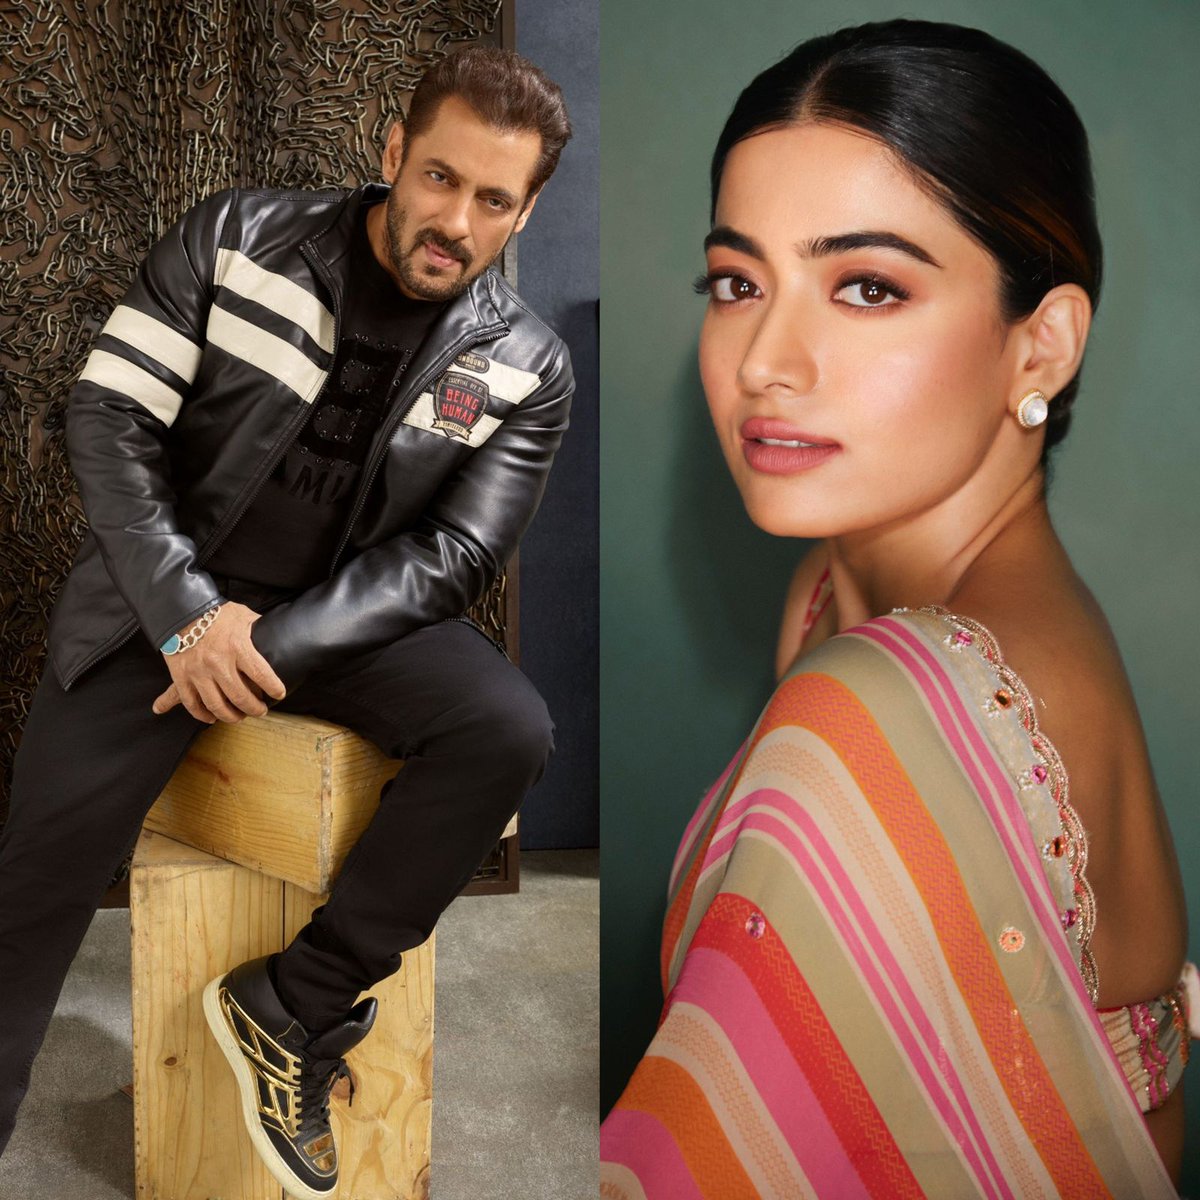 The National Crush @IamRashmika 's Pan India Reign Continues! She is currently busy with the much-anticipated #Pushpa2TheRule, is set to star in another Pan-Indian biggie #Sikandar opposite Bollywood Superstar @BeingSalmankhan ❤️‍🔥😍